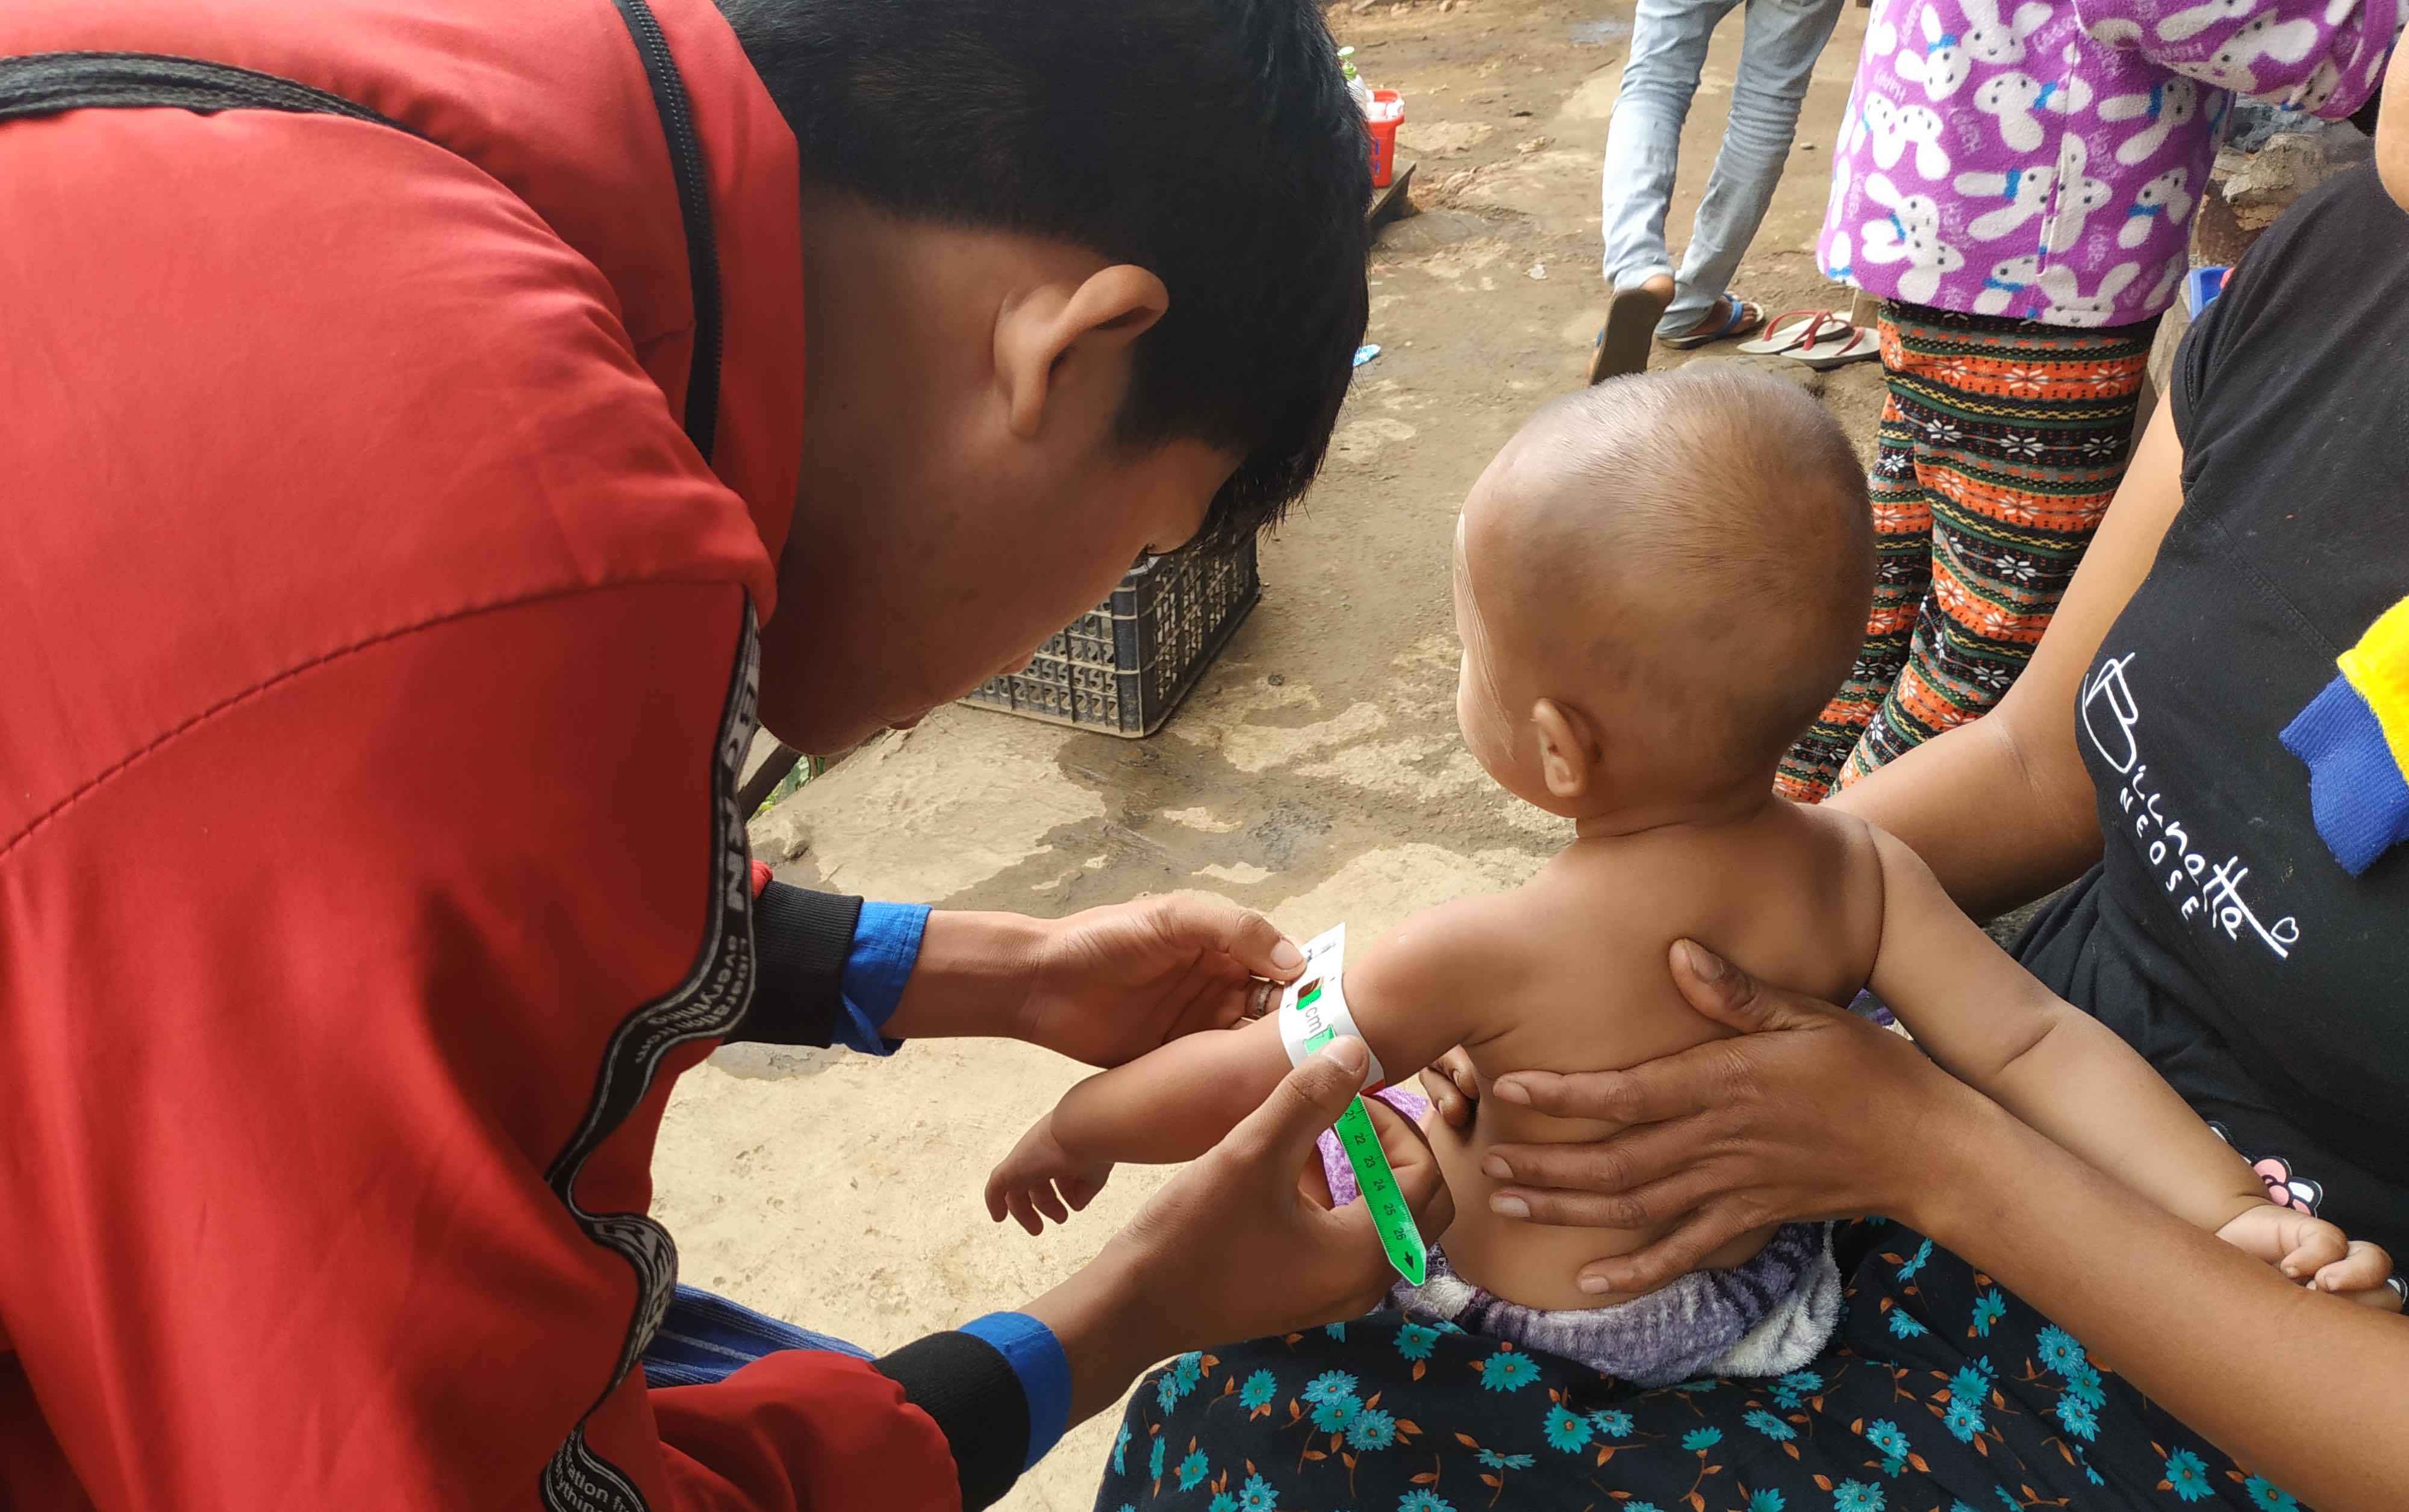 Cash, COVID, coup, crisis: A pre-pandemic maternal and child cash transfer program had sustained dietary benefits during Myanmar’s ongoing emergency